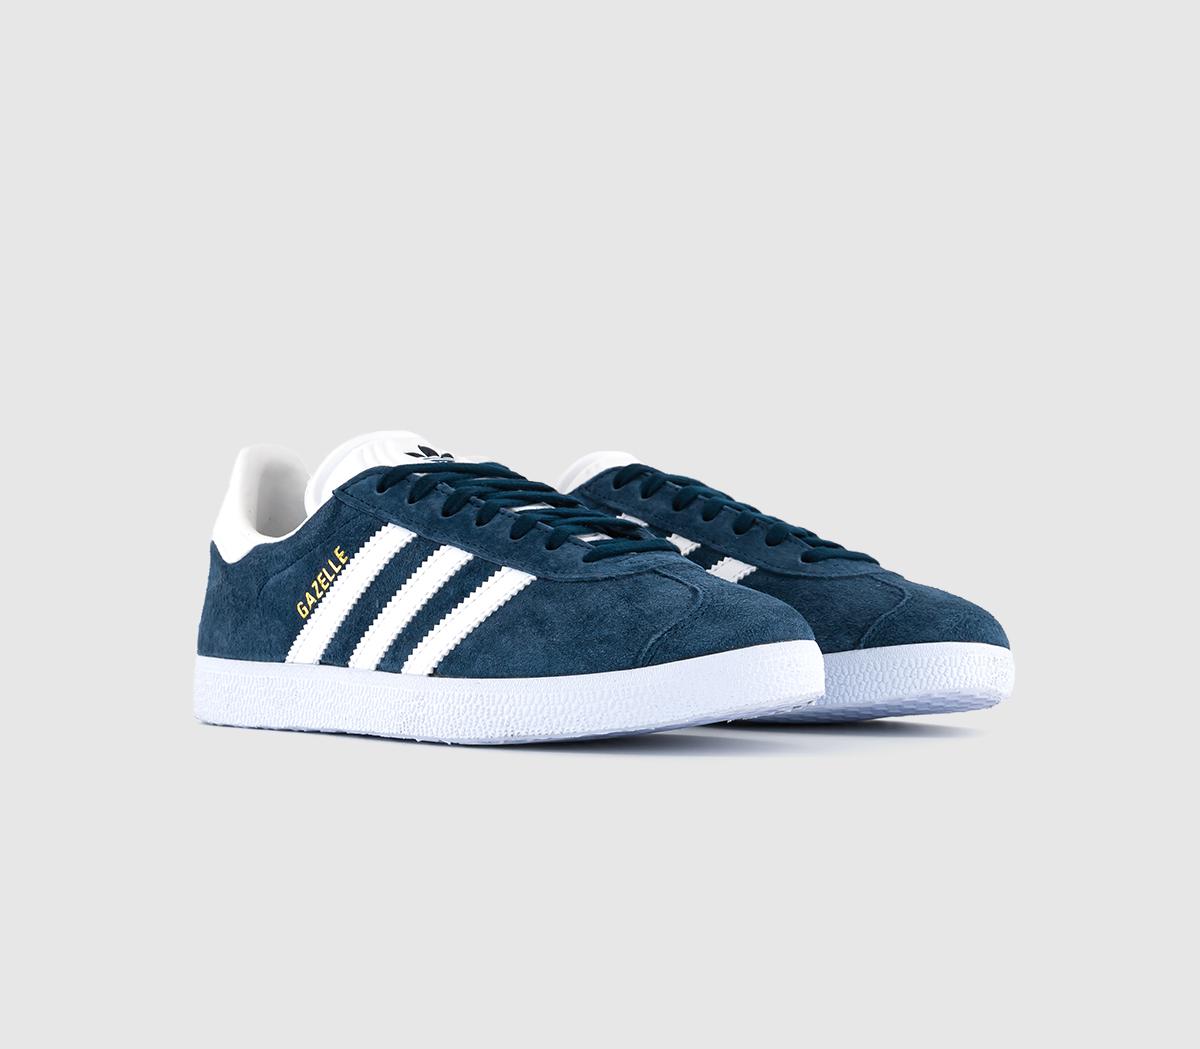 Adidas Gazelle Collegiate Navy Blue And White Leather Stripe Trainers, 6